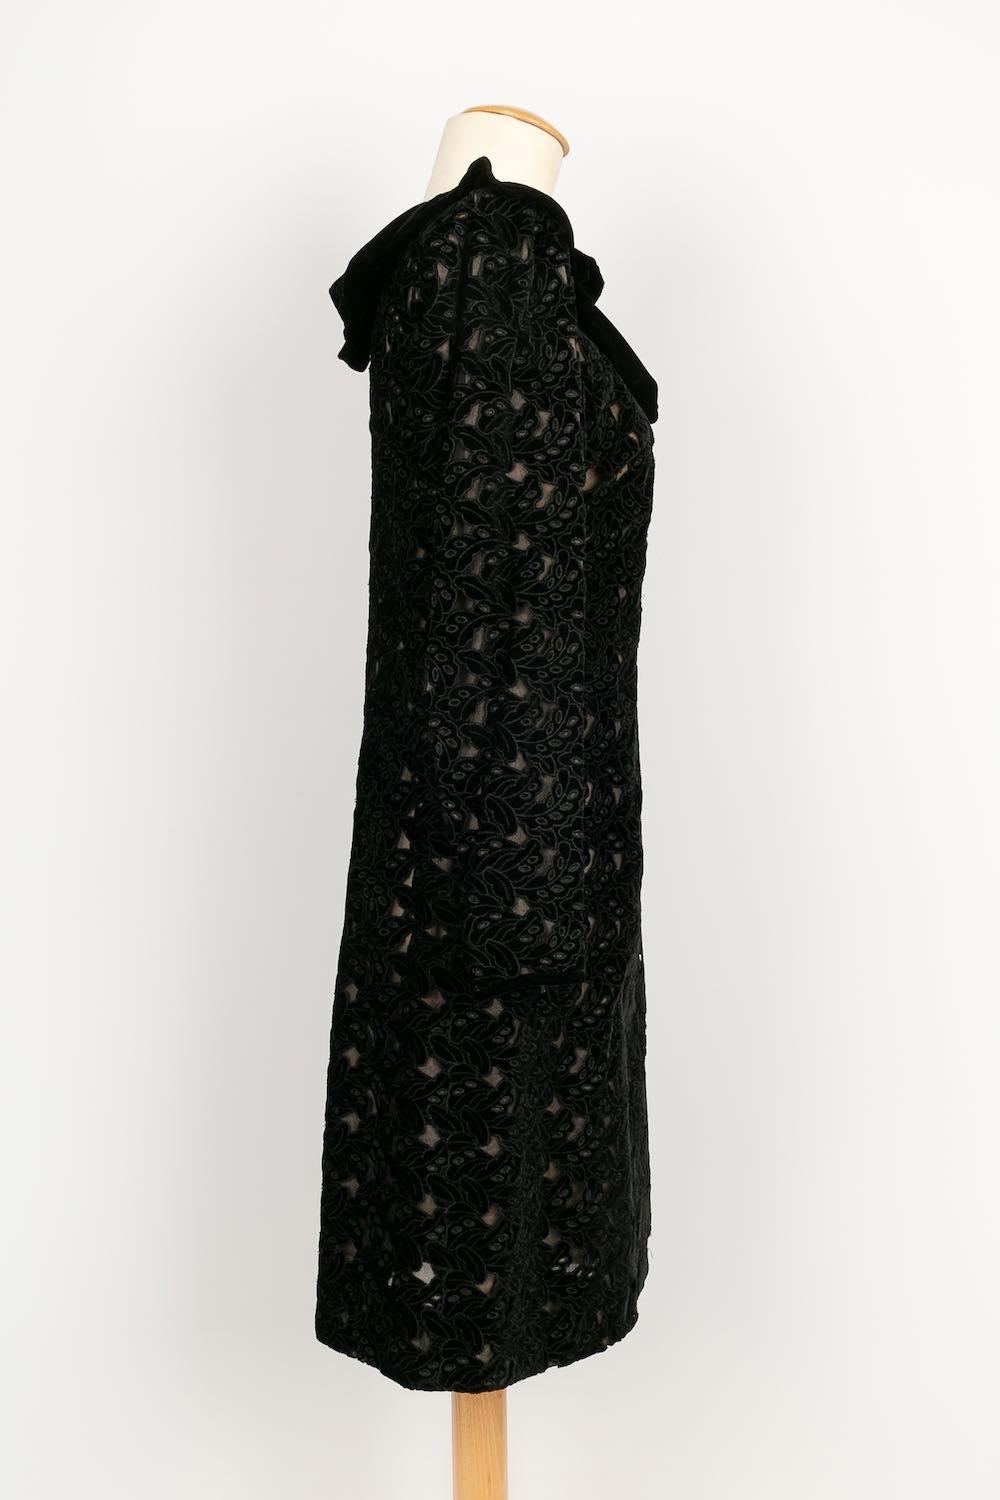 Yves Saint Laurent Haute Couture -(Made in France) Black silk velvet openwork short dress. No size indicated, it corresponds to a 40FR.

Additional information: 
Dimensions: Shoulder width: 40 cm, Chest: 47 cm, Sleeve length: 60 cm, Length: 97